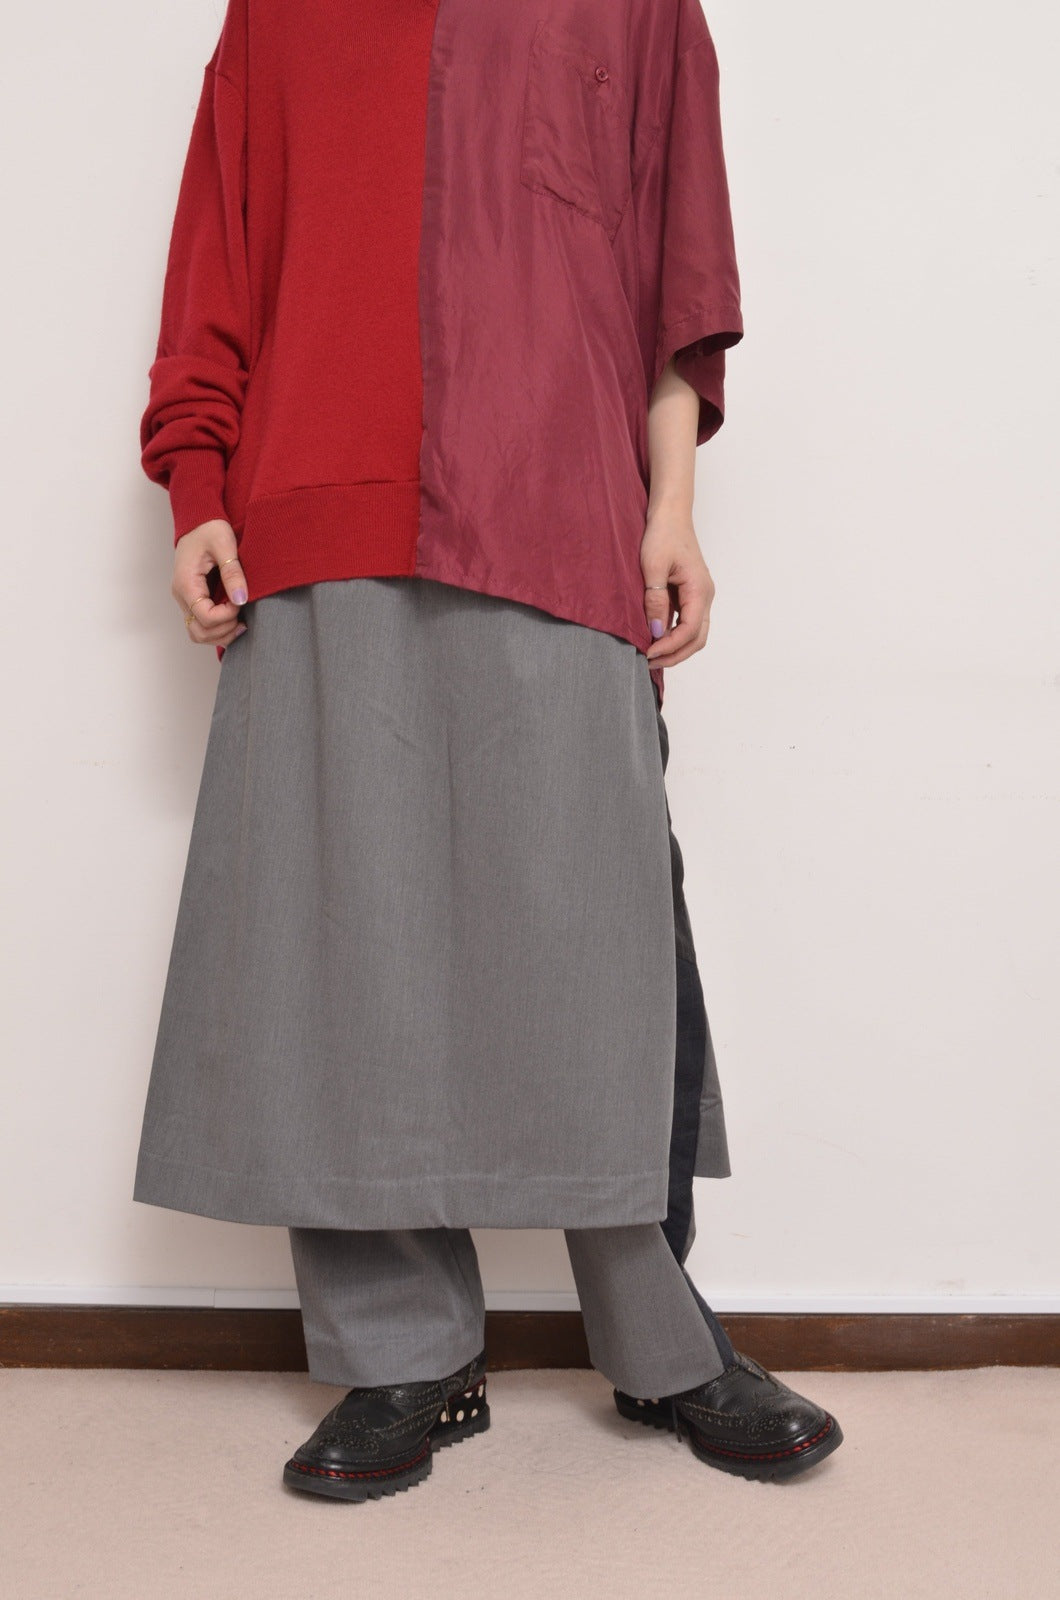 [your right things 代官山 蔦屋書店出品中]SKIRT PT /  GRY_01/002